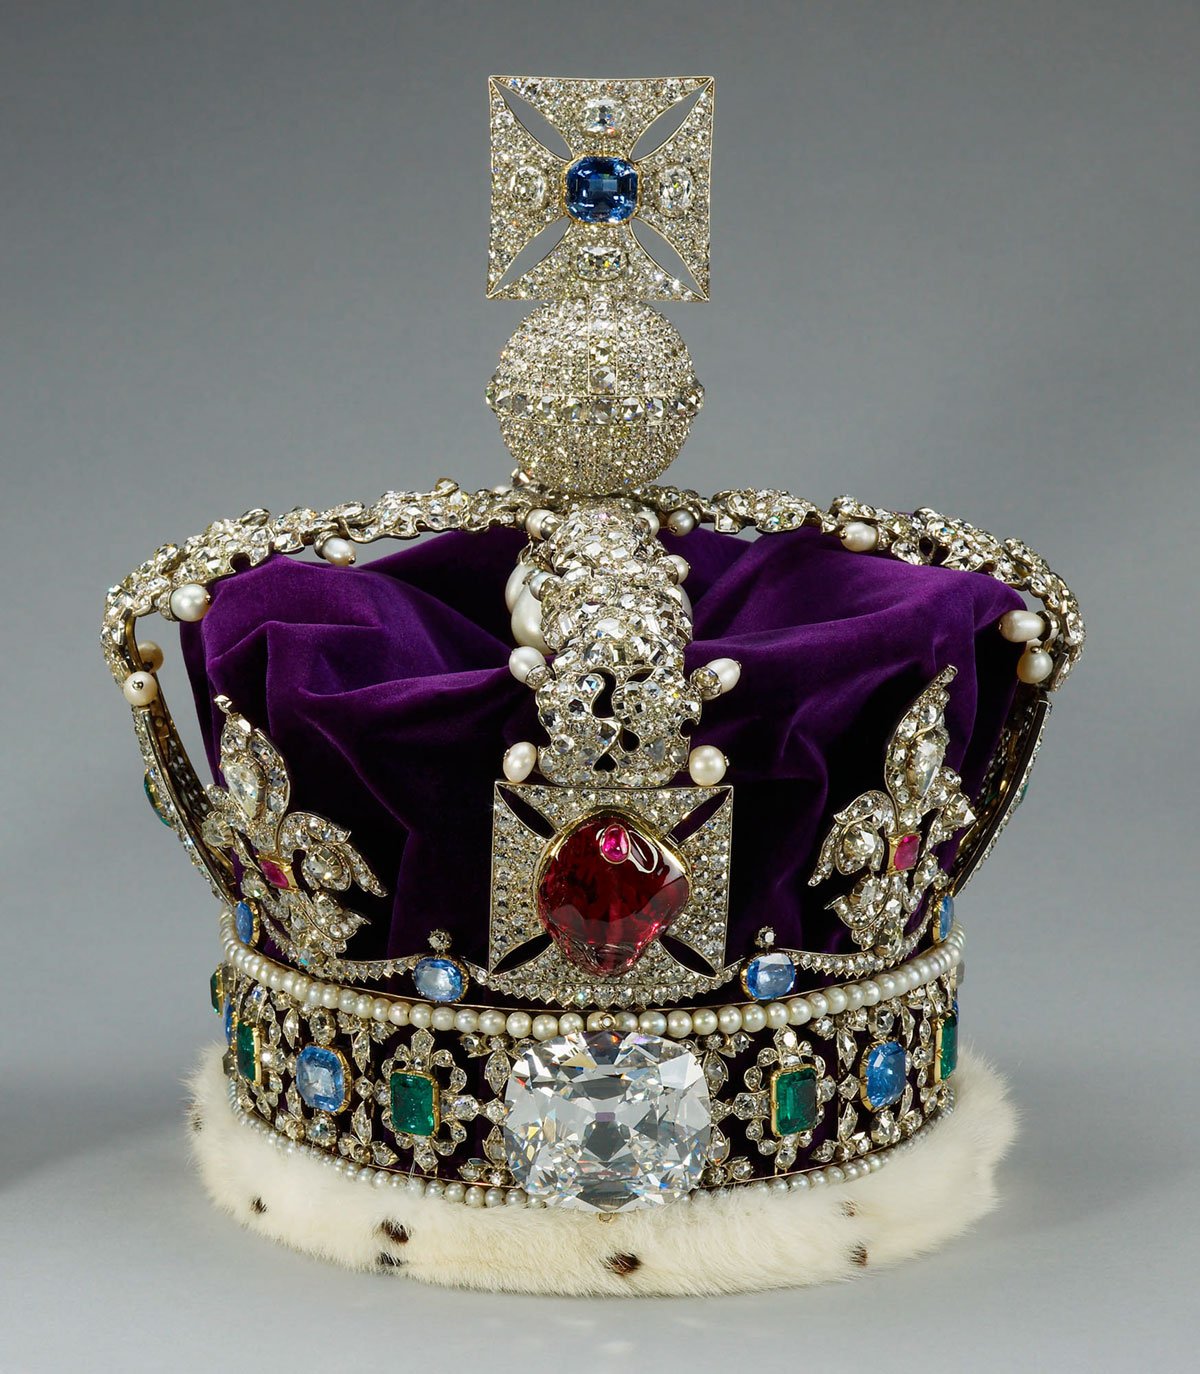 Perhaps the world's most famous gem, the Black Prince's Ruby (front, center), is actually a large red spinel. Its history is documented back to 1366 AD. Today it is mounted on the front of Britain's Imperial State Crown, which is located in the Tower of London. Britain's Imperial State Crown contains more famous gems than virtually any other ornament in the world, including the Black Prince's Ruby, the Stuart Sapphire (not visible), St. Edward's Sapphire (on top) and the Cullinan II diamond (below the Black Prince's Ruby).